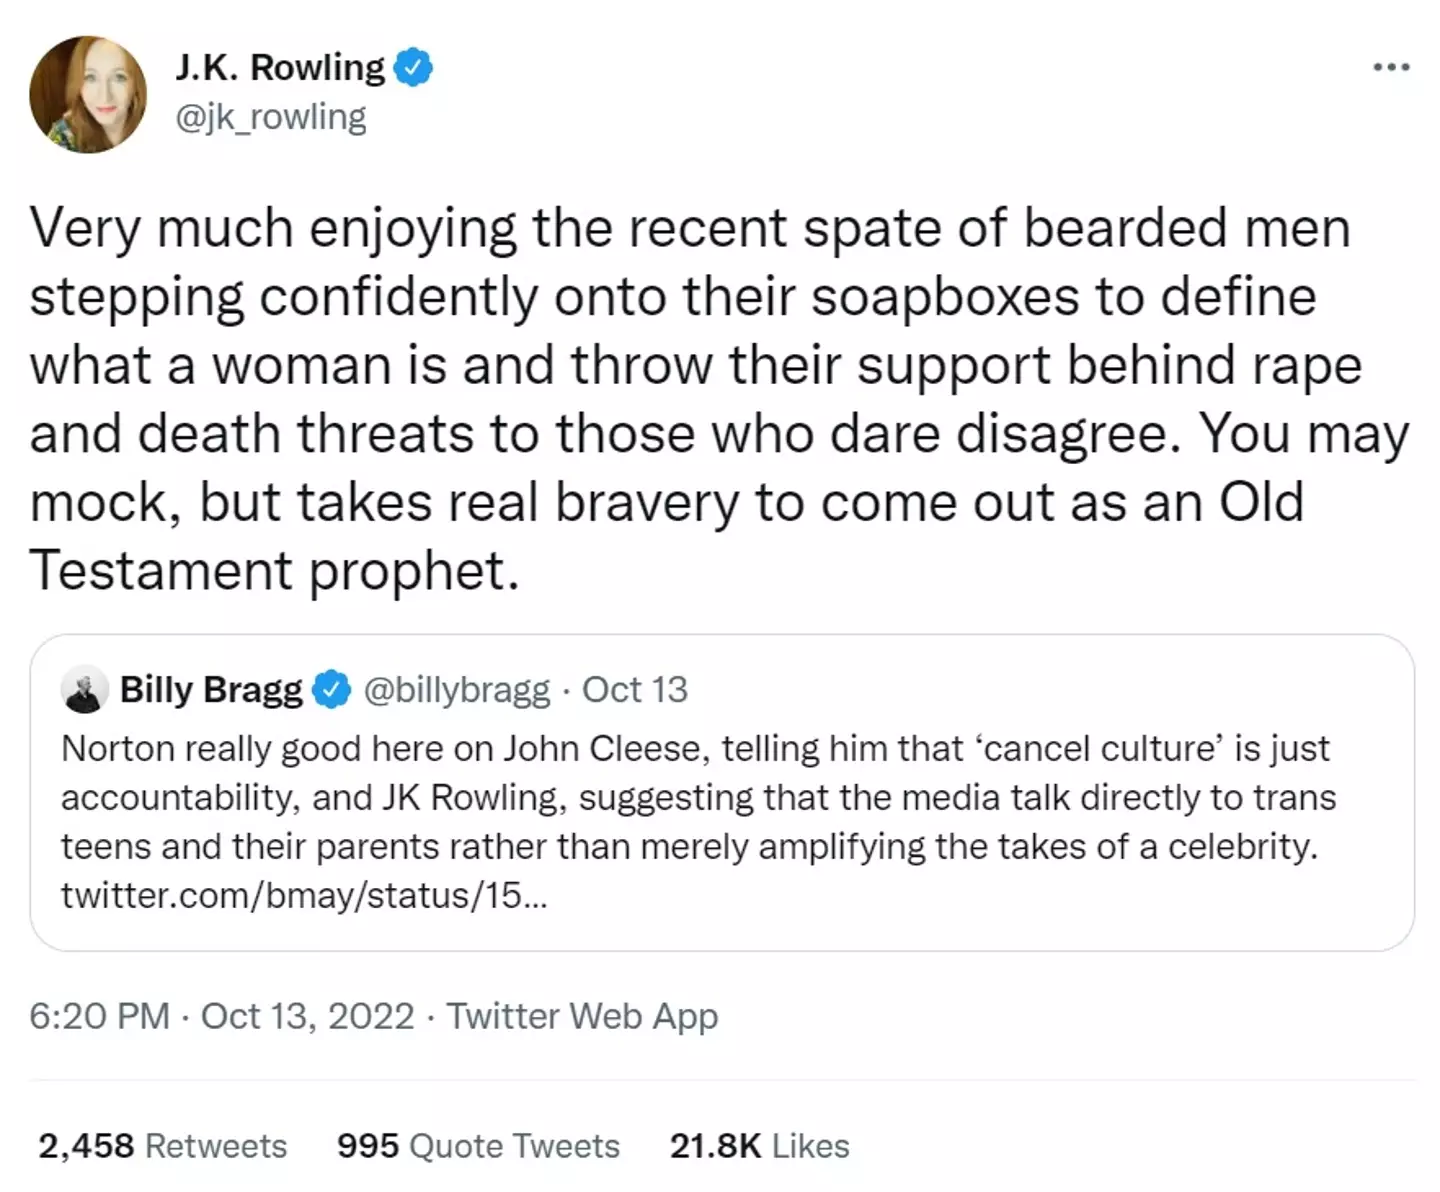 Harry Potter author JK Rowling was not a fan of Norton's comments or the support for them.